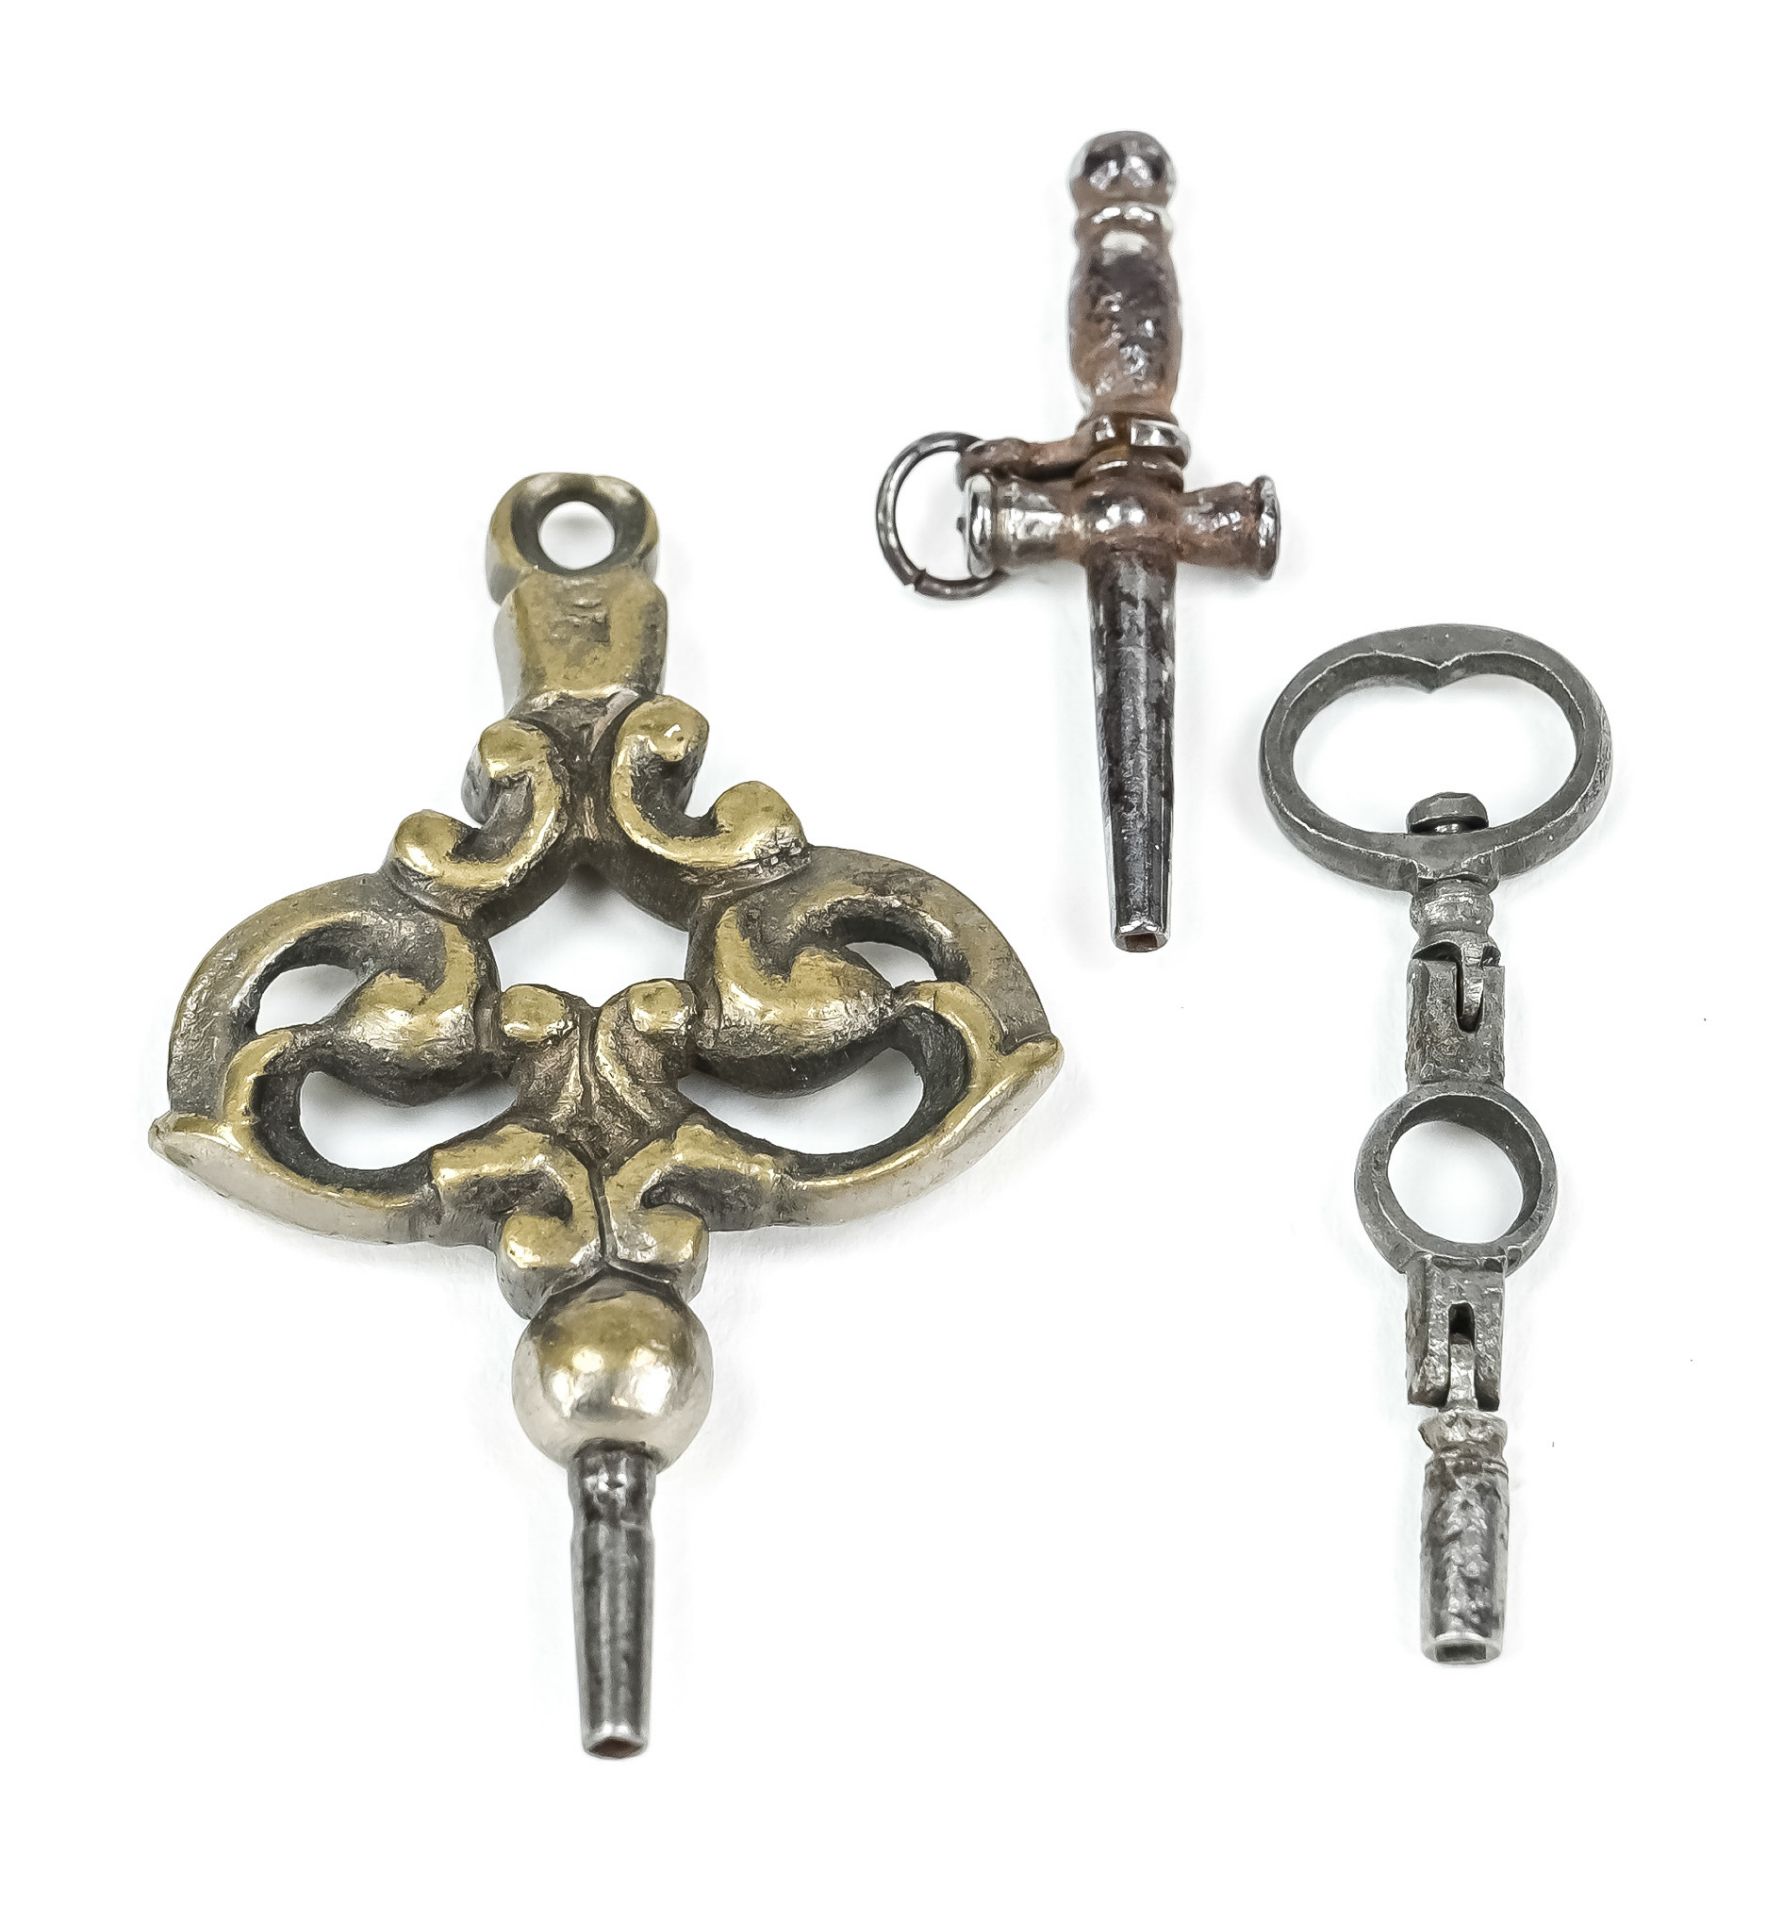 3 antique pocket watch keys, 18th-19th century, made of iron and brass, as crank, dagger and others,